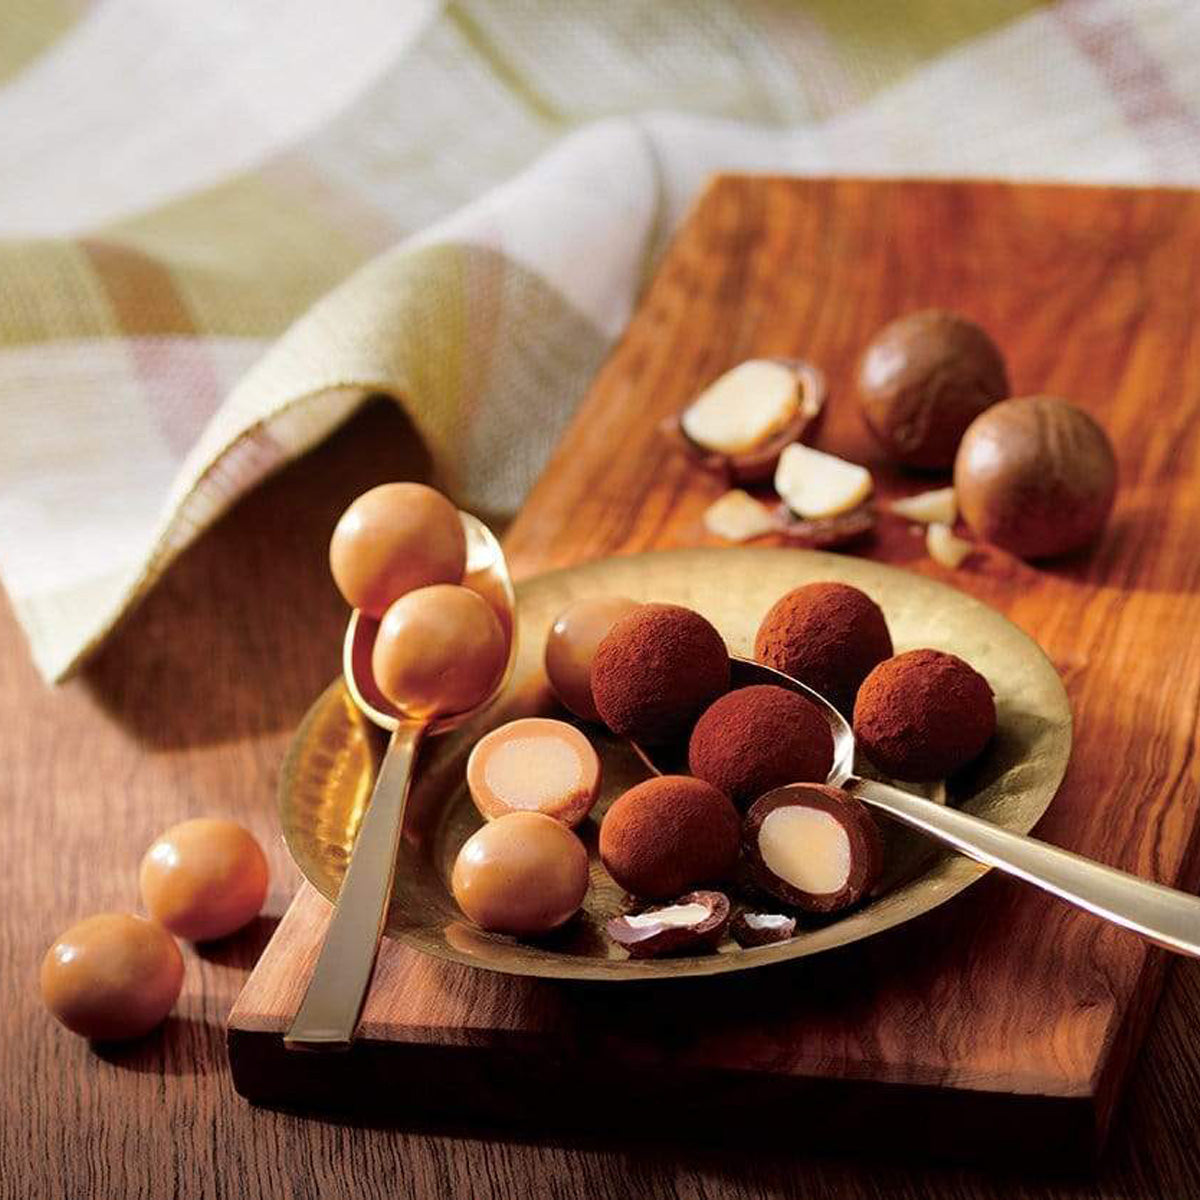 ROYCE' Chocolate - Macadamia Chocolate - Image shows brown chocolate-coated macadamia nuts on a copper plate with bronze spoons. Background accents include macadamia nuts, a brown wooden chopping board and a white cloth with red and brown stripes.